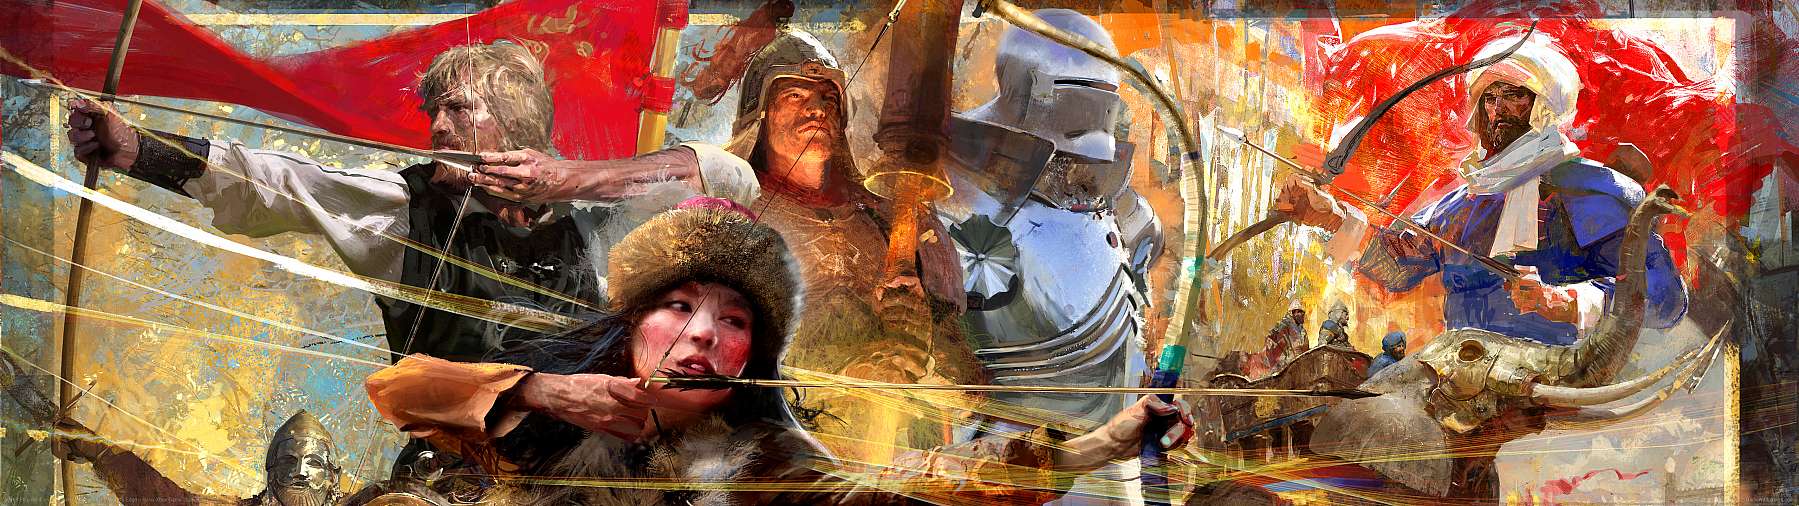 Age of Empires 4 superwide fond d'cran 02